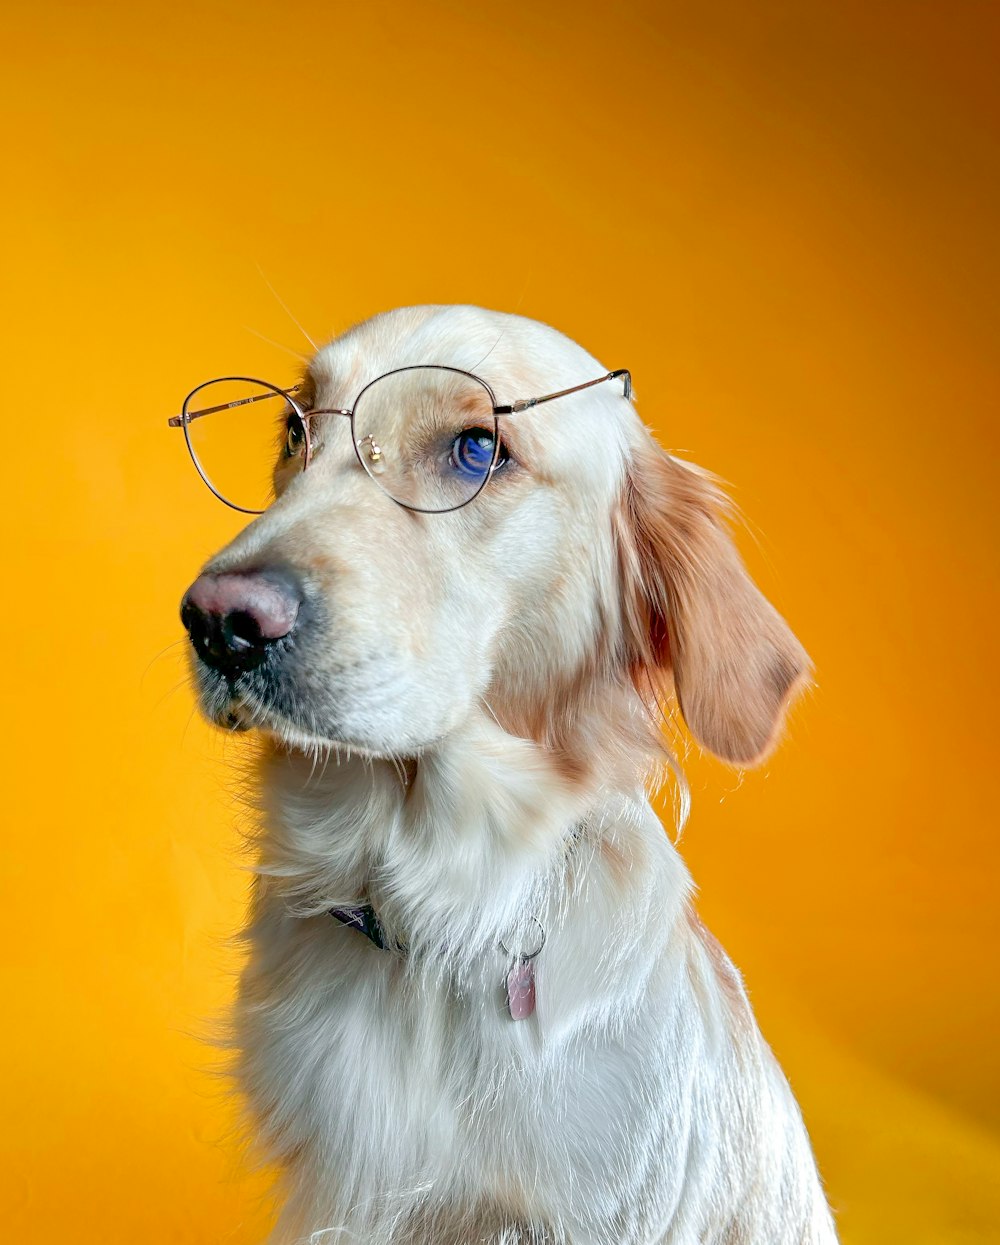 a white dog wearing glasses against a yellow background